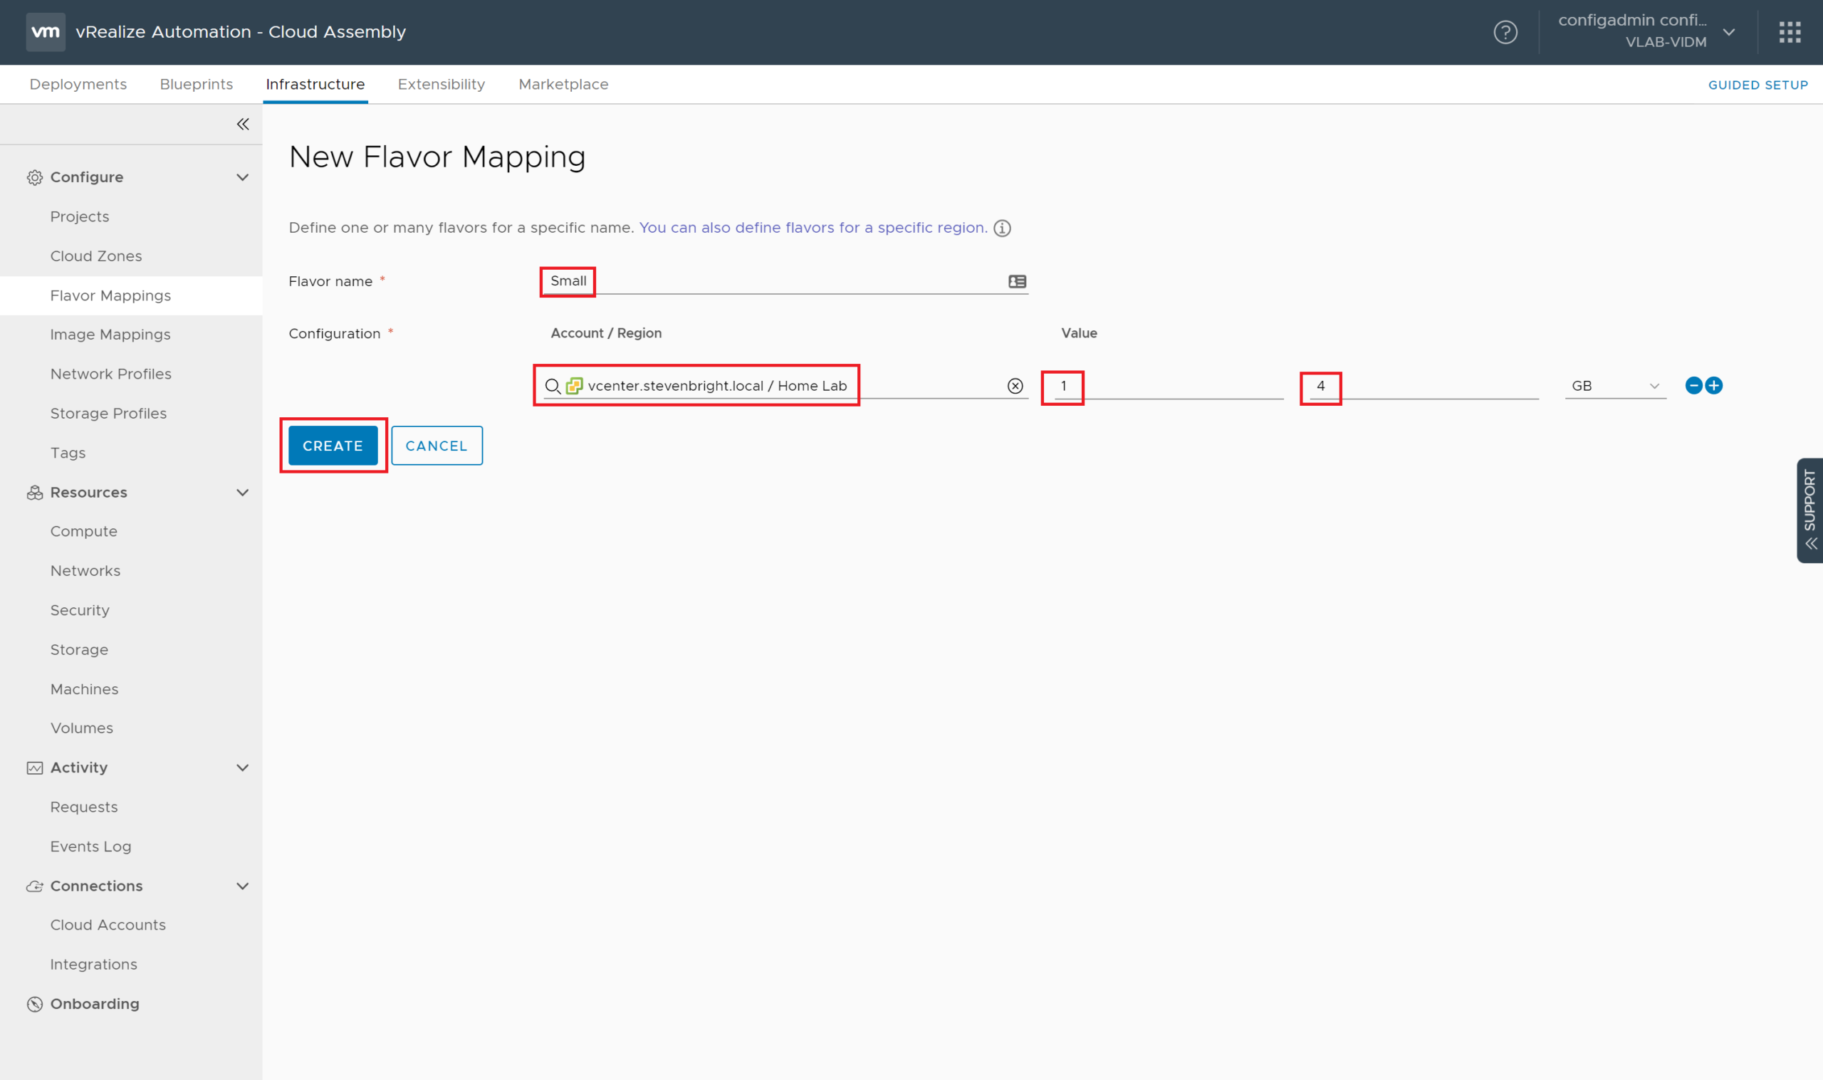 vRealize Automation 8.0 - Cloud Assembly - Flavor Mappings - New Flavor Mapping